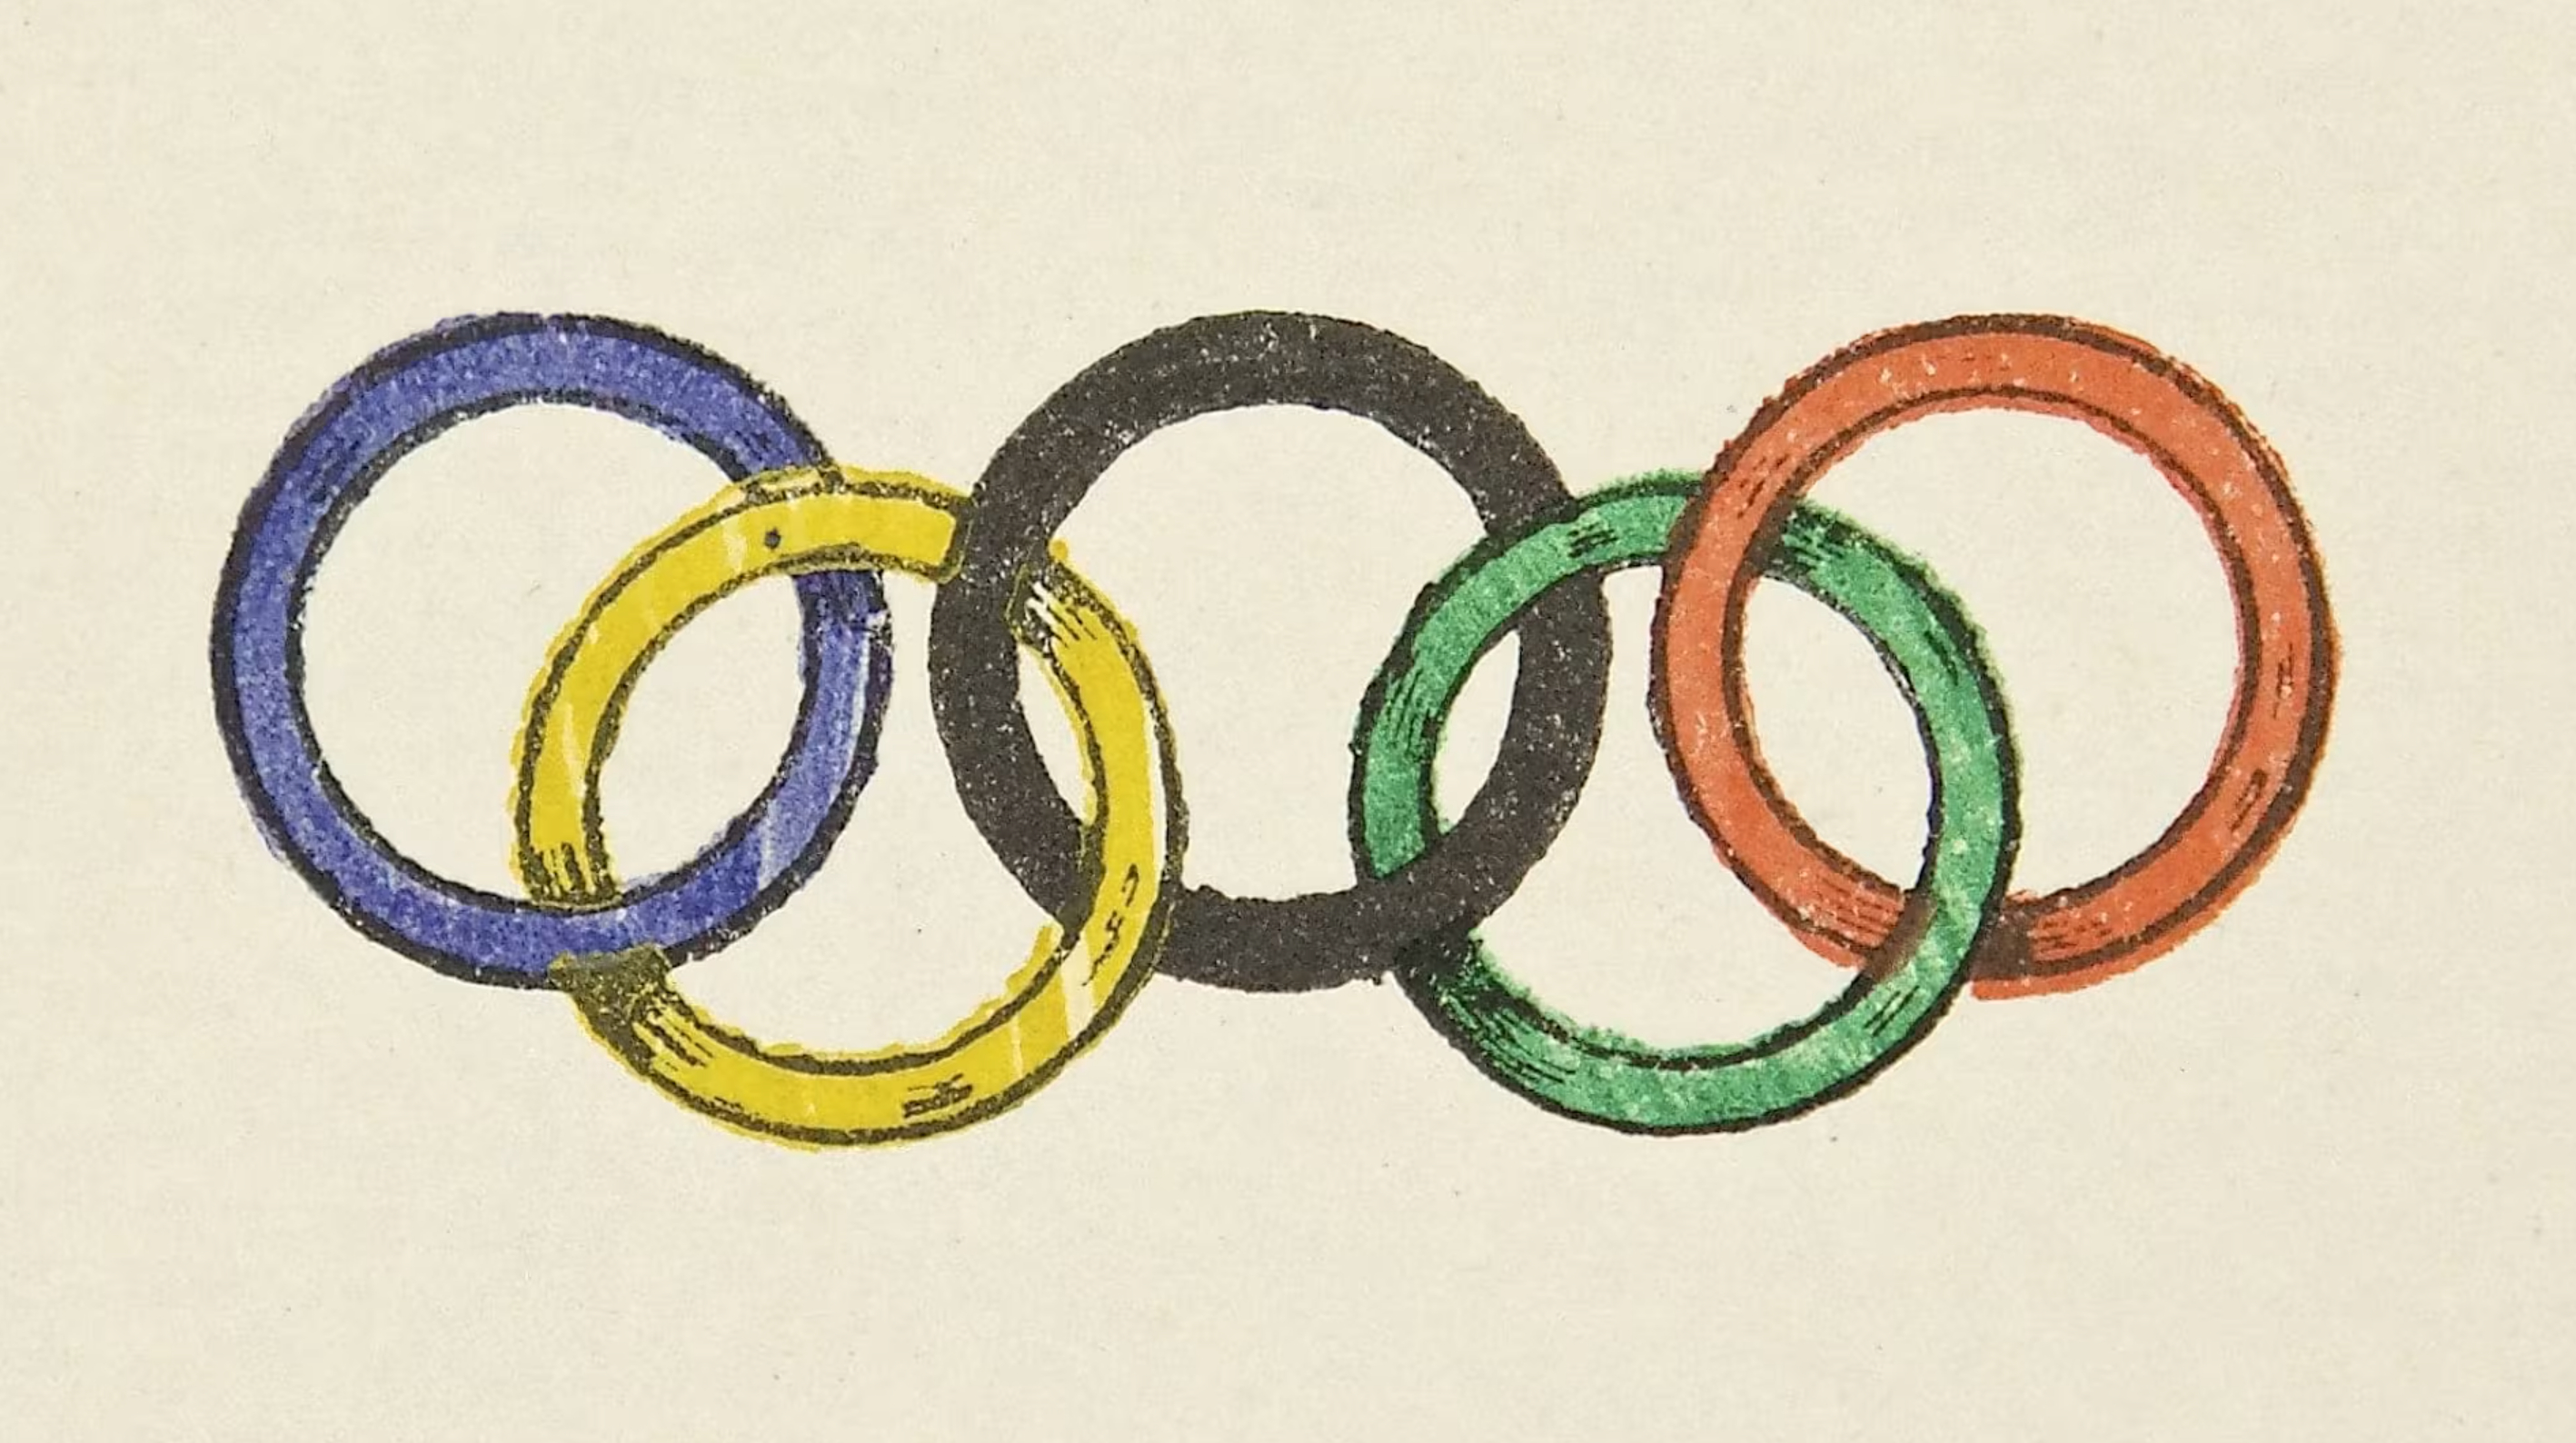 The original sketch of the Olympic rings